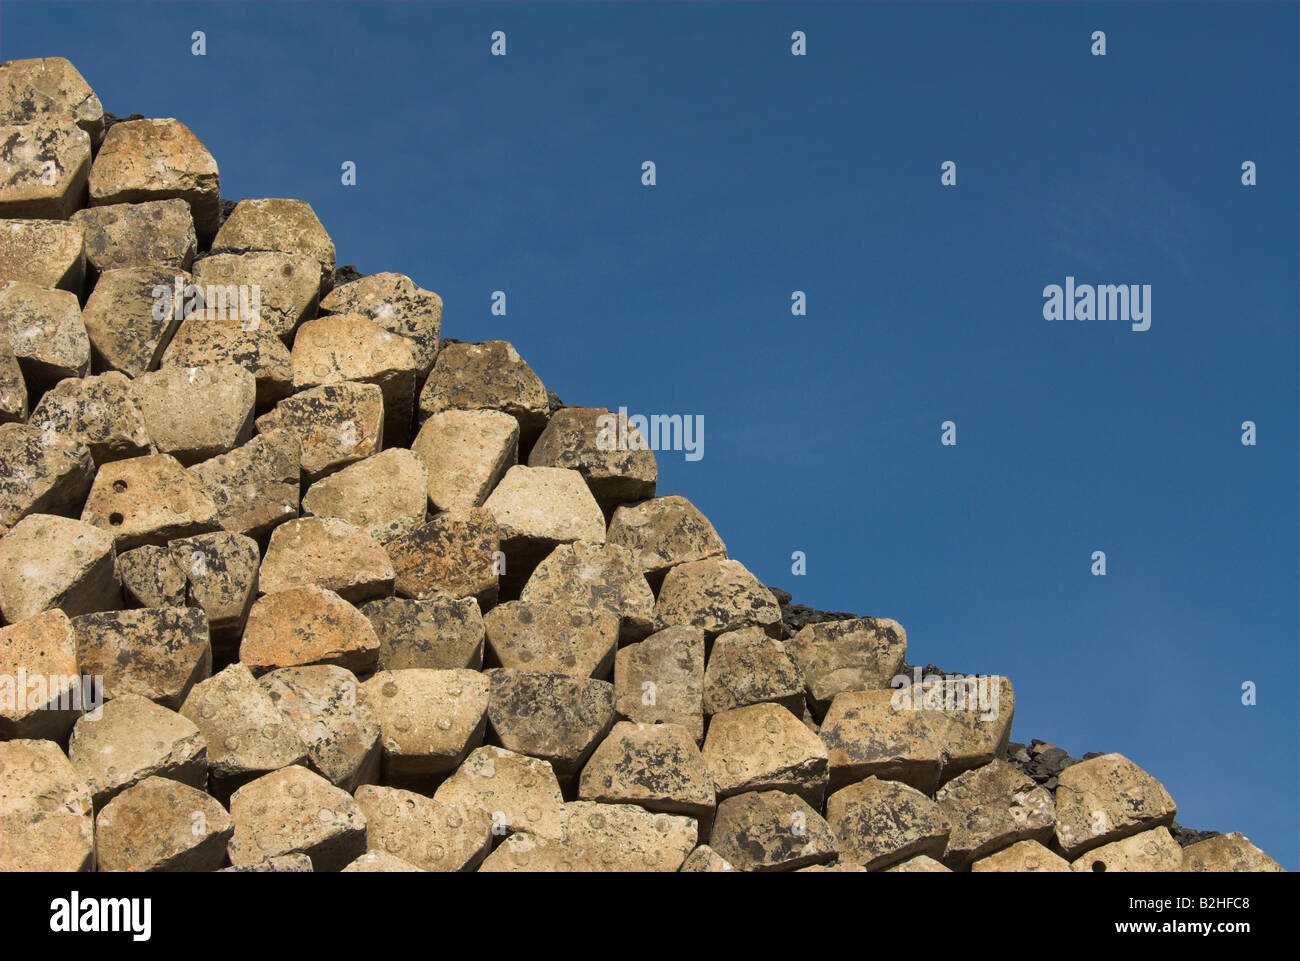 Beton figured patterned structure structures stacked Stock Photo